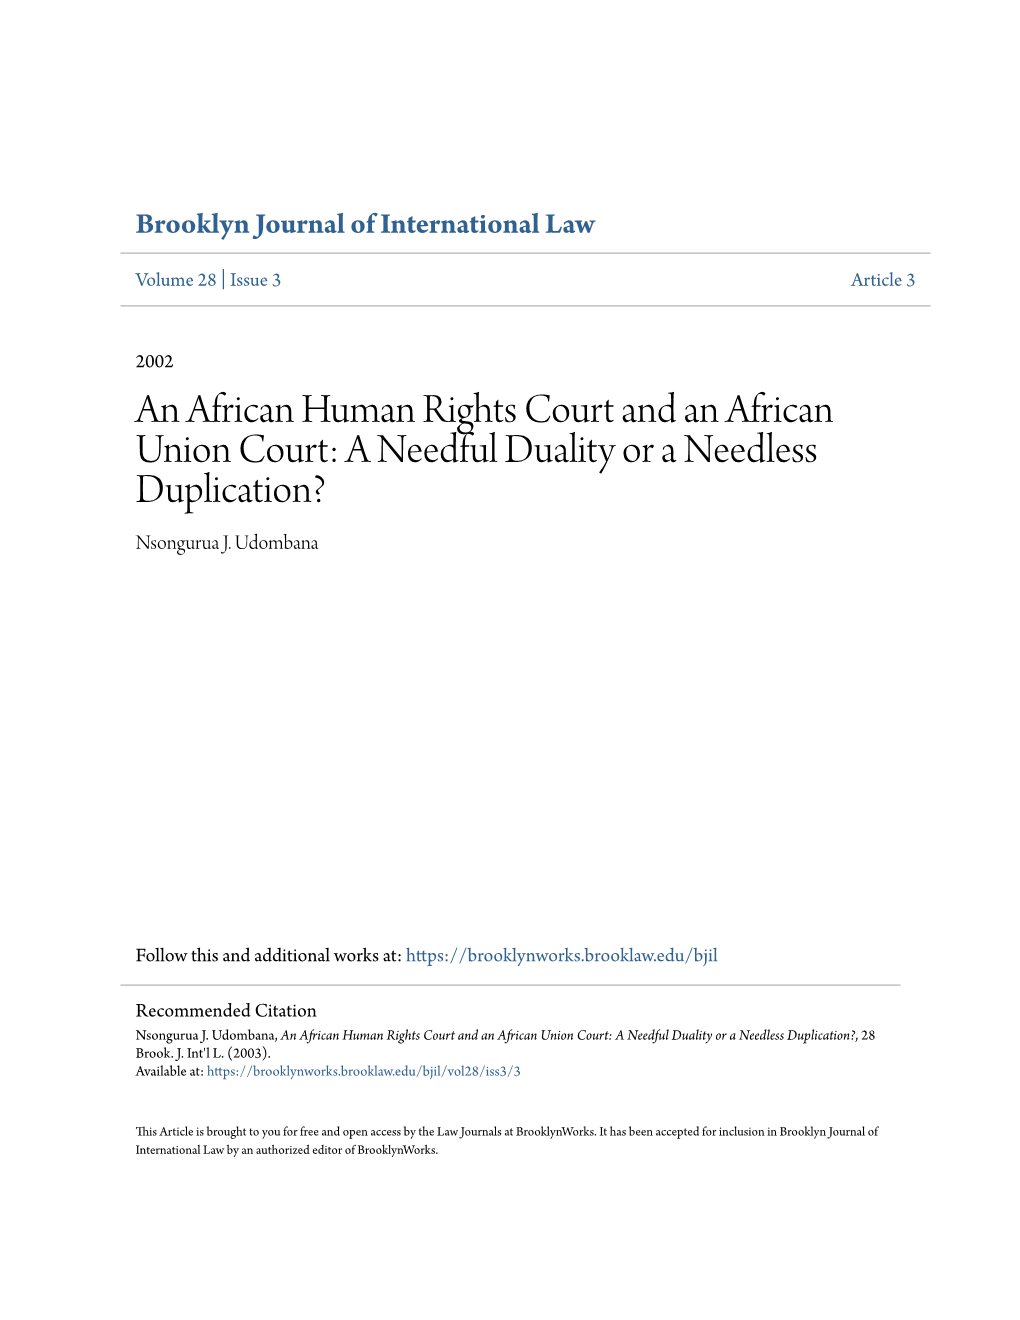 An African Human Rights Court and an African Union Court: a Needful Duality Or a Needless Duplication? Nsongurua J